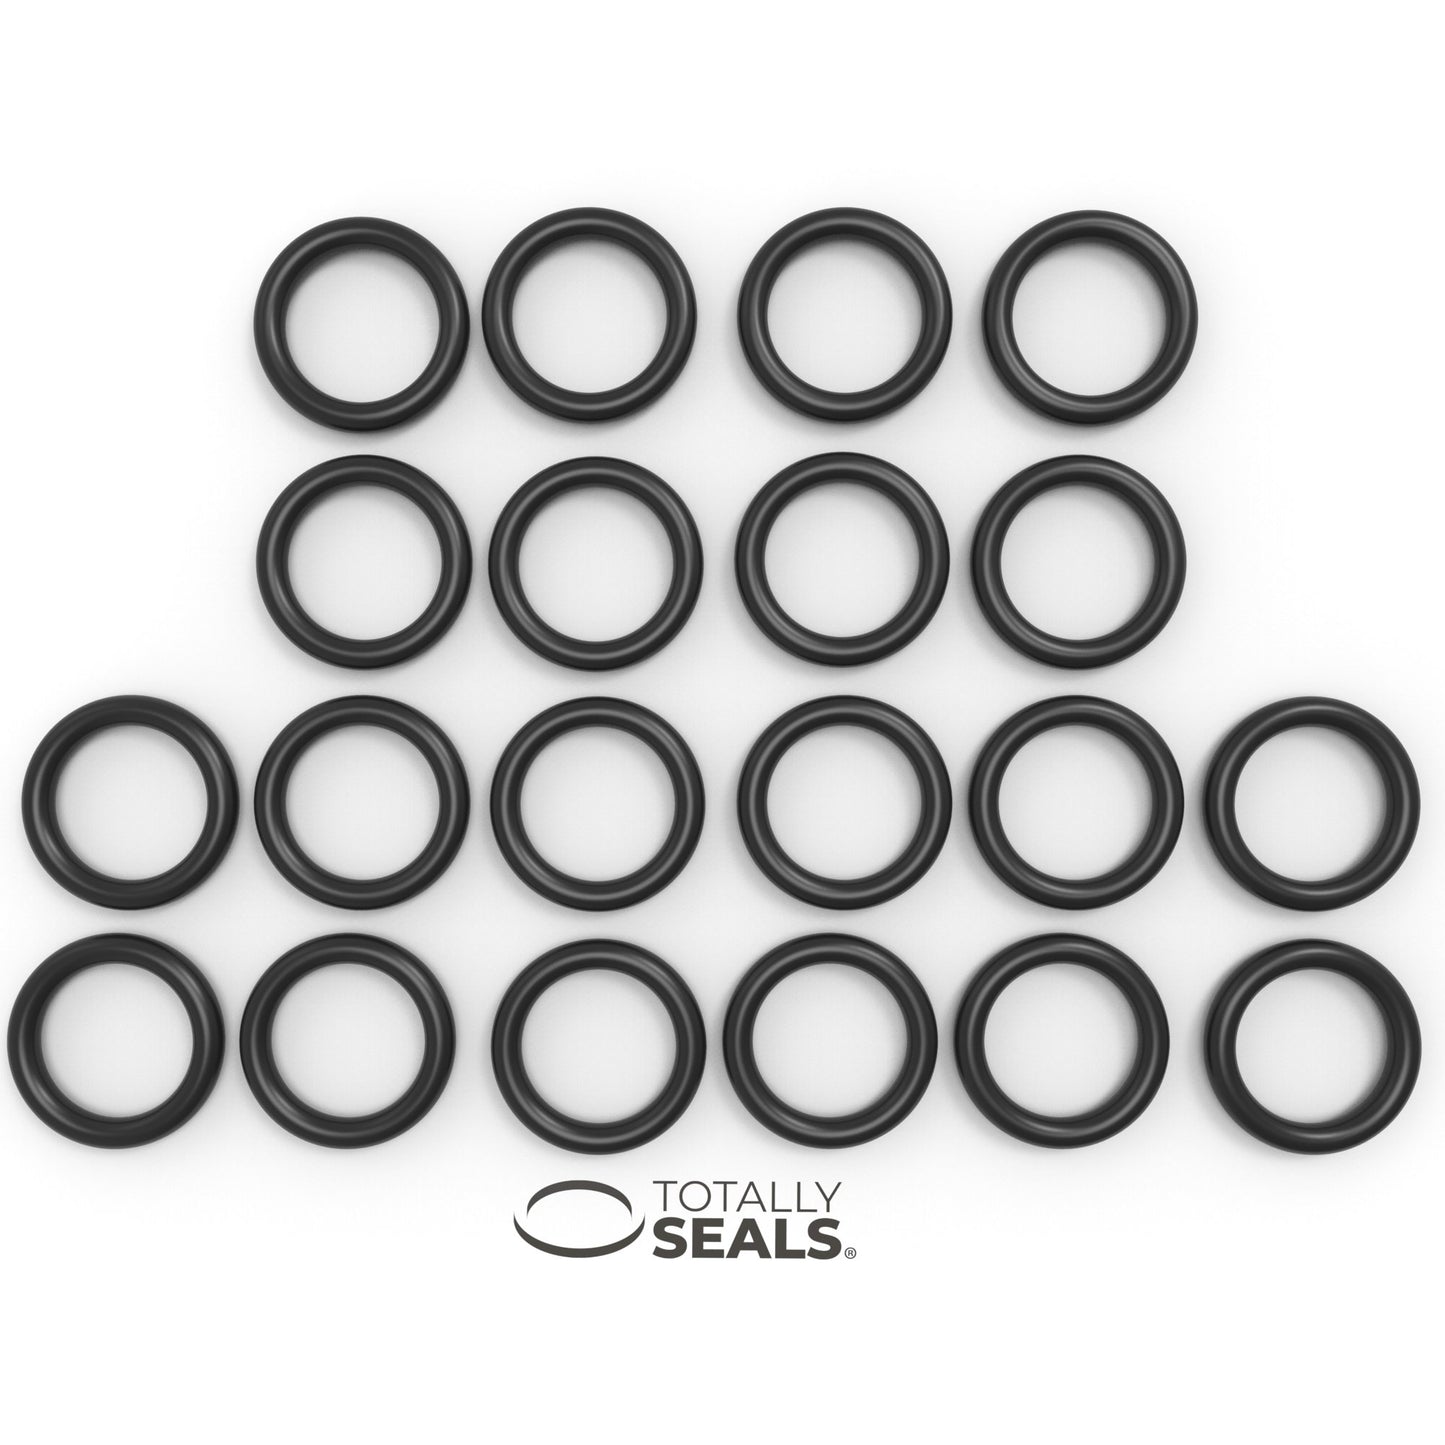 43mm x 3mm (49mm OD) Nitrile O-Rings - Totally Seals®